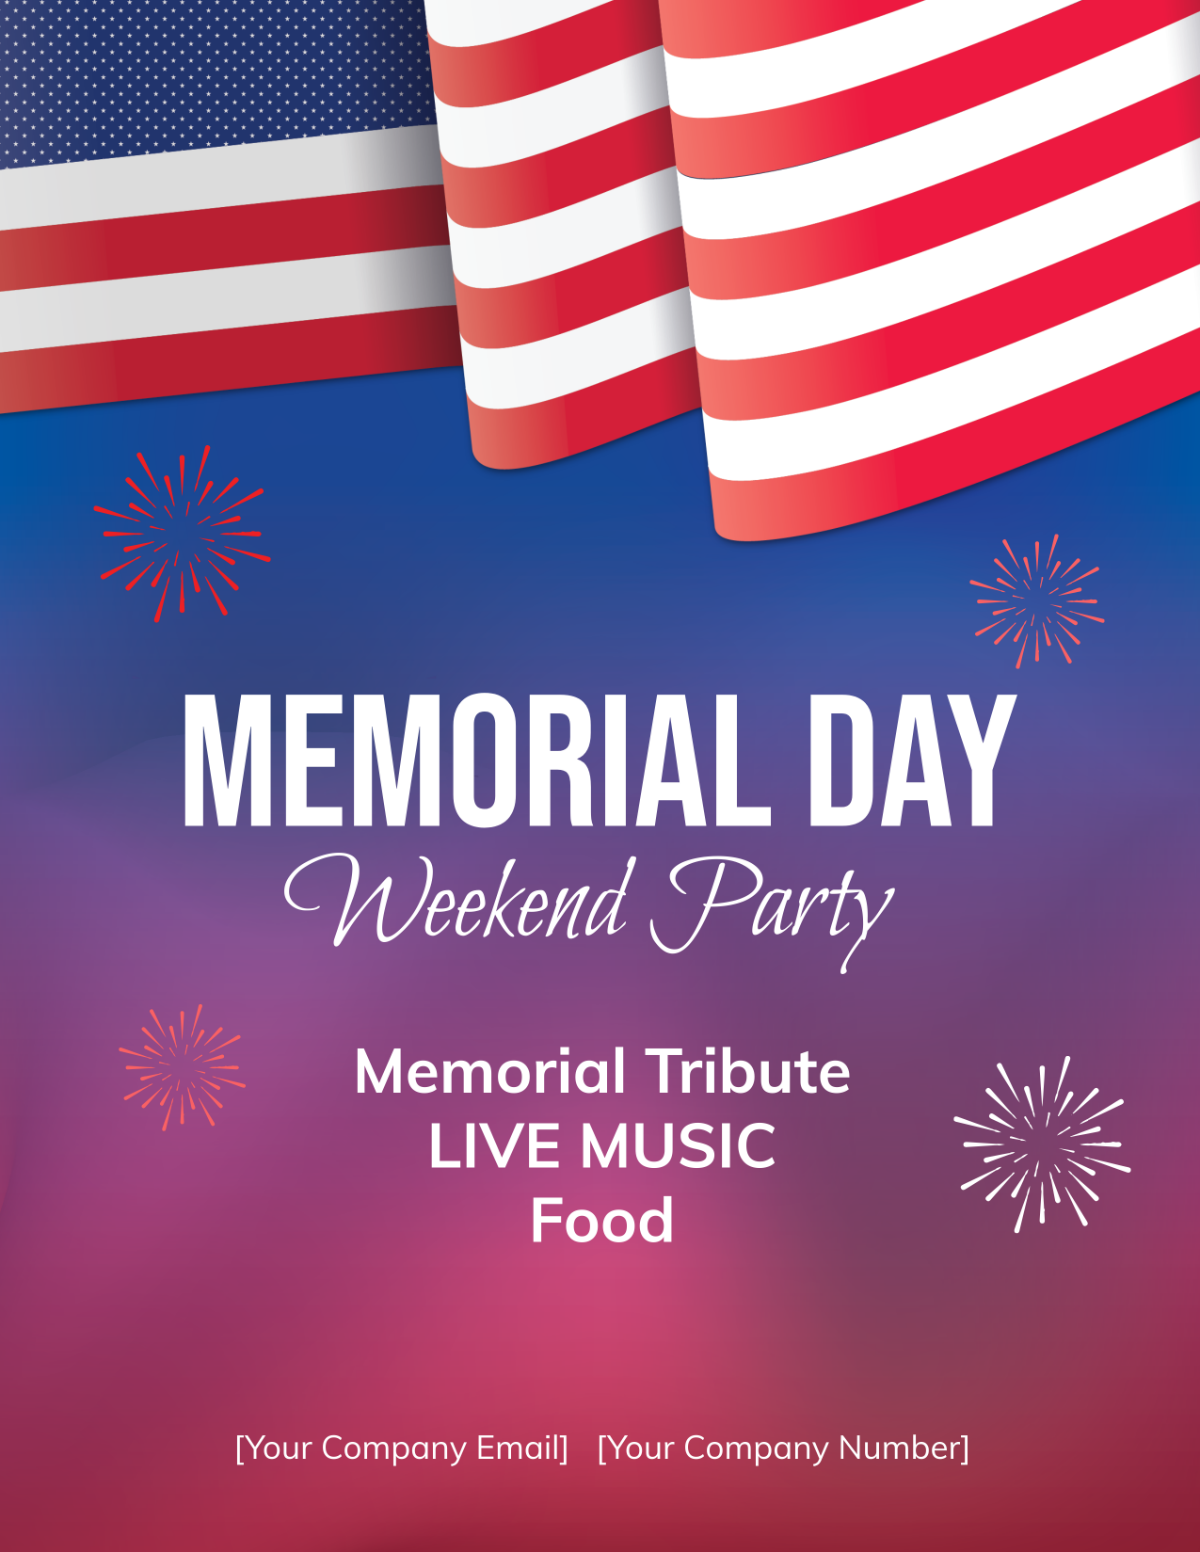 Free Memorial Day Weekend Party Flyer Template